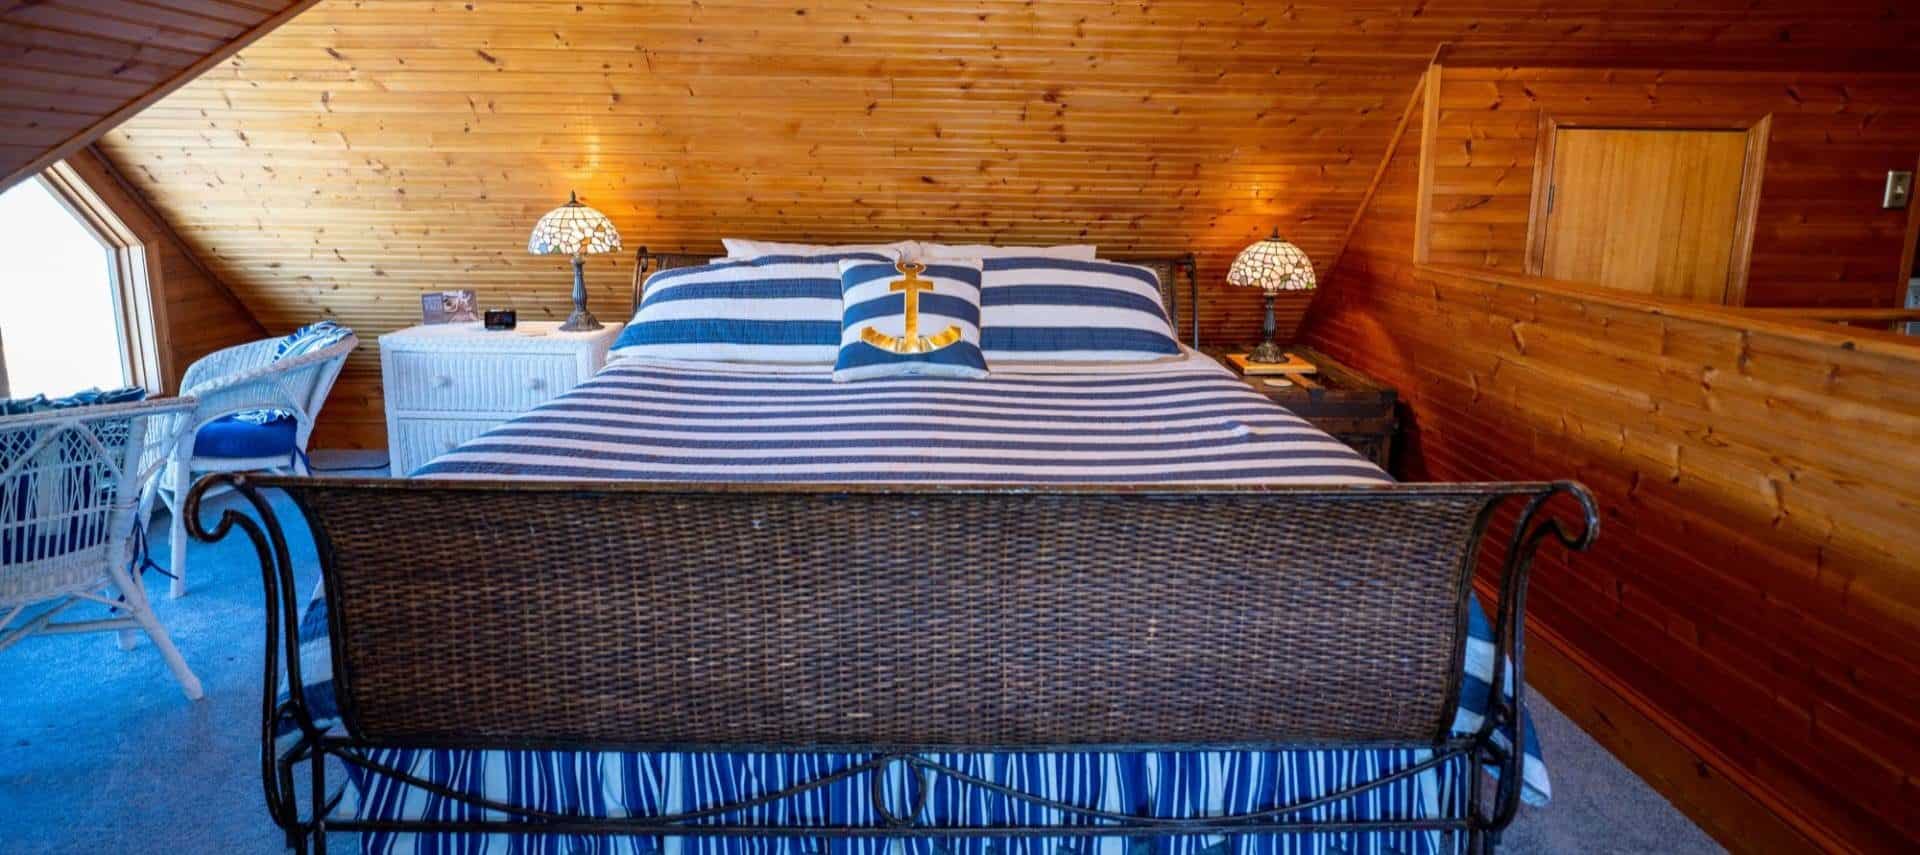 Room with floor to ceiling wood paneling, blue carpeting, dark brown wicker sleigh bed with blue and white striped bedding, and white wicker dresser